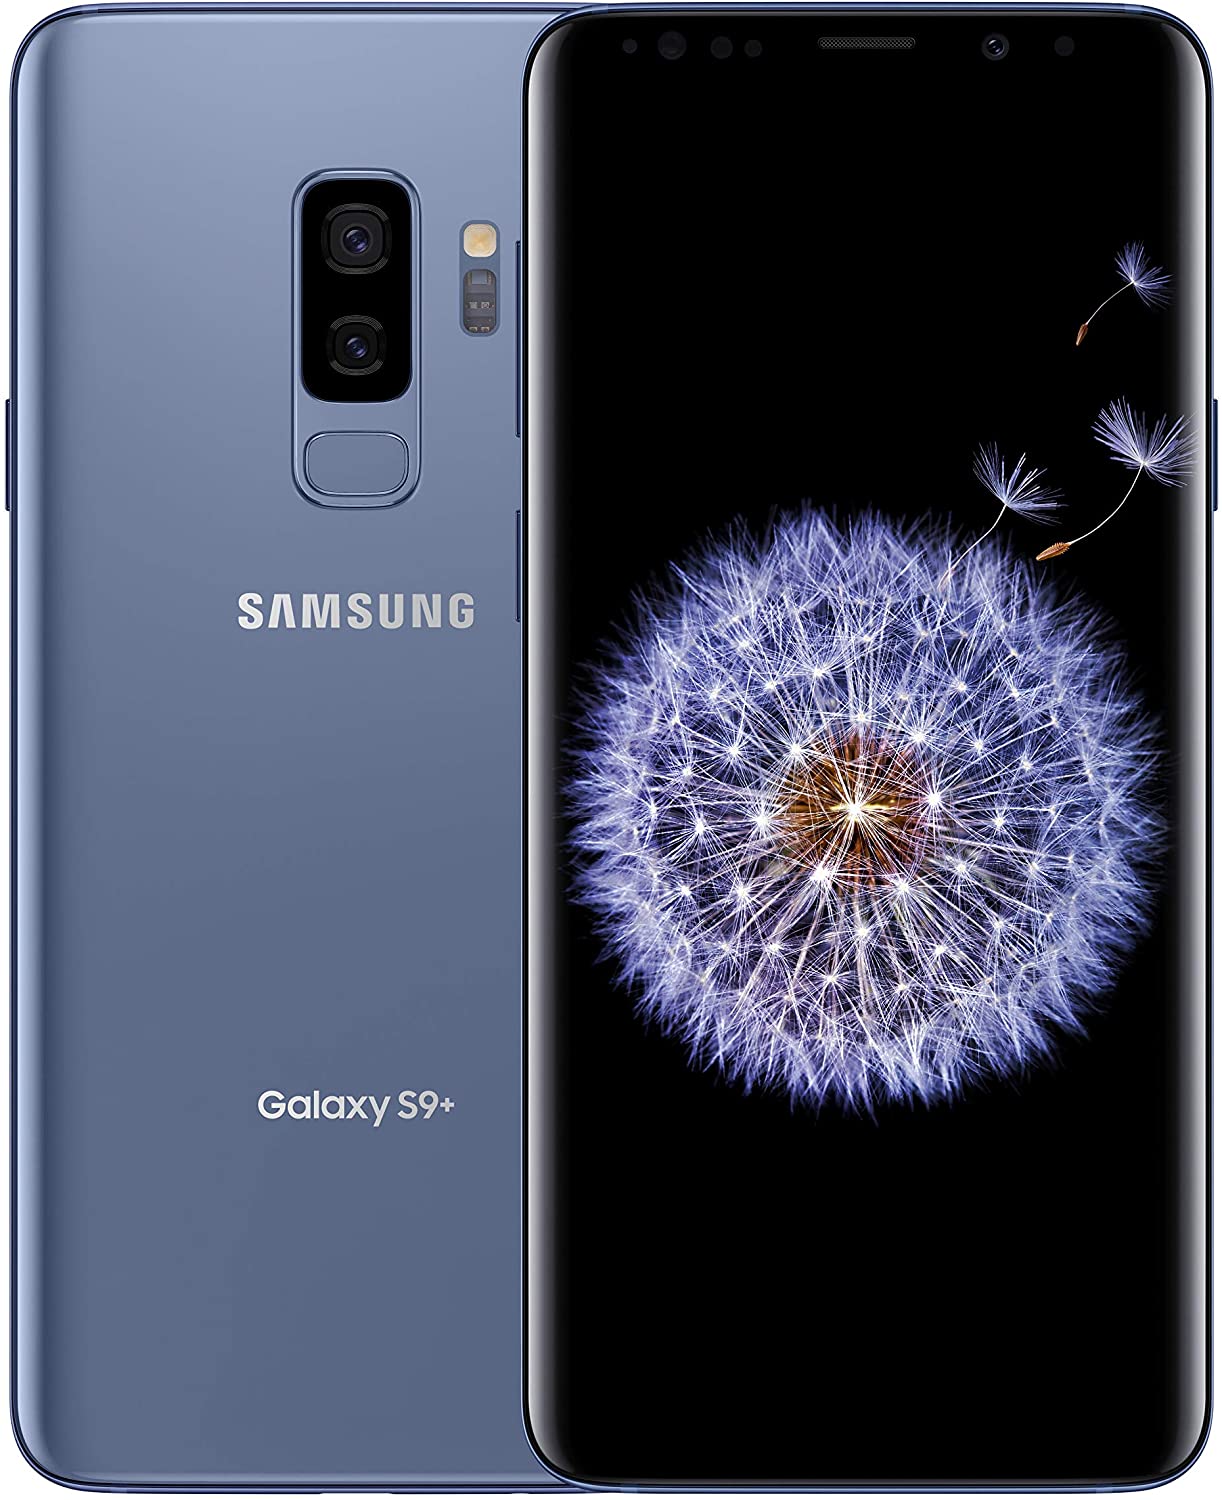 Samsung Galaxy S9 Plus 64GB Blue (Like New) With Case, Screen Protector & Shipping